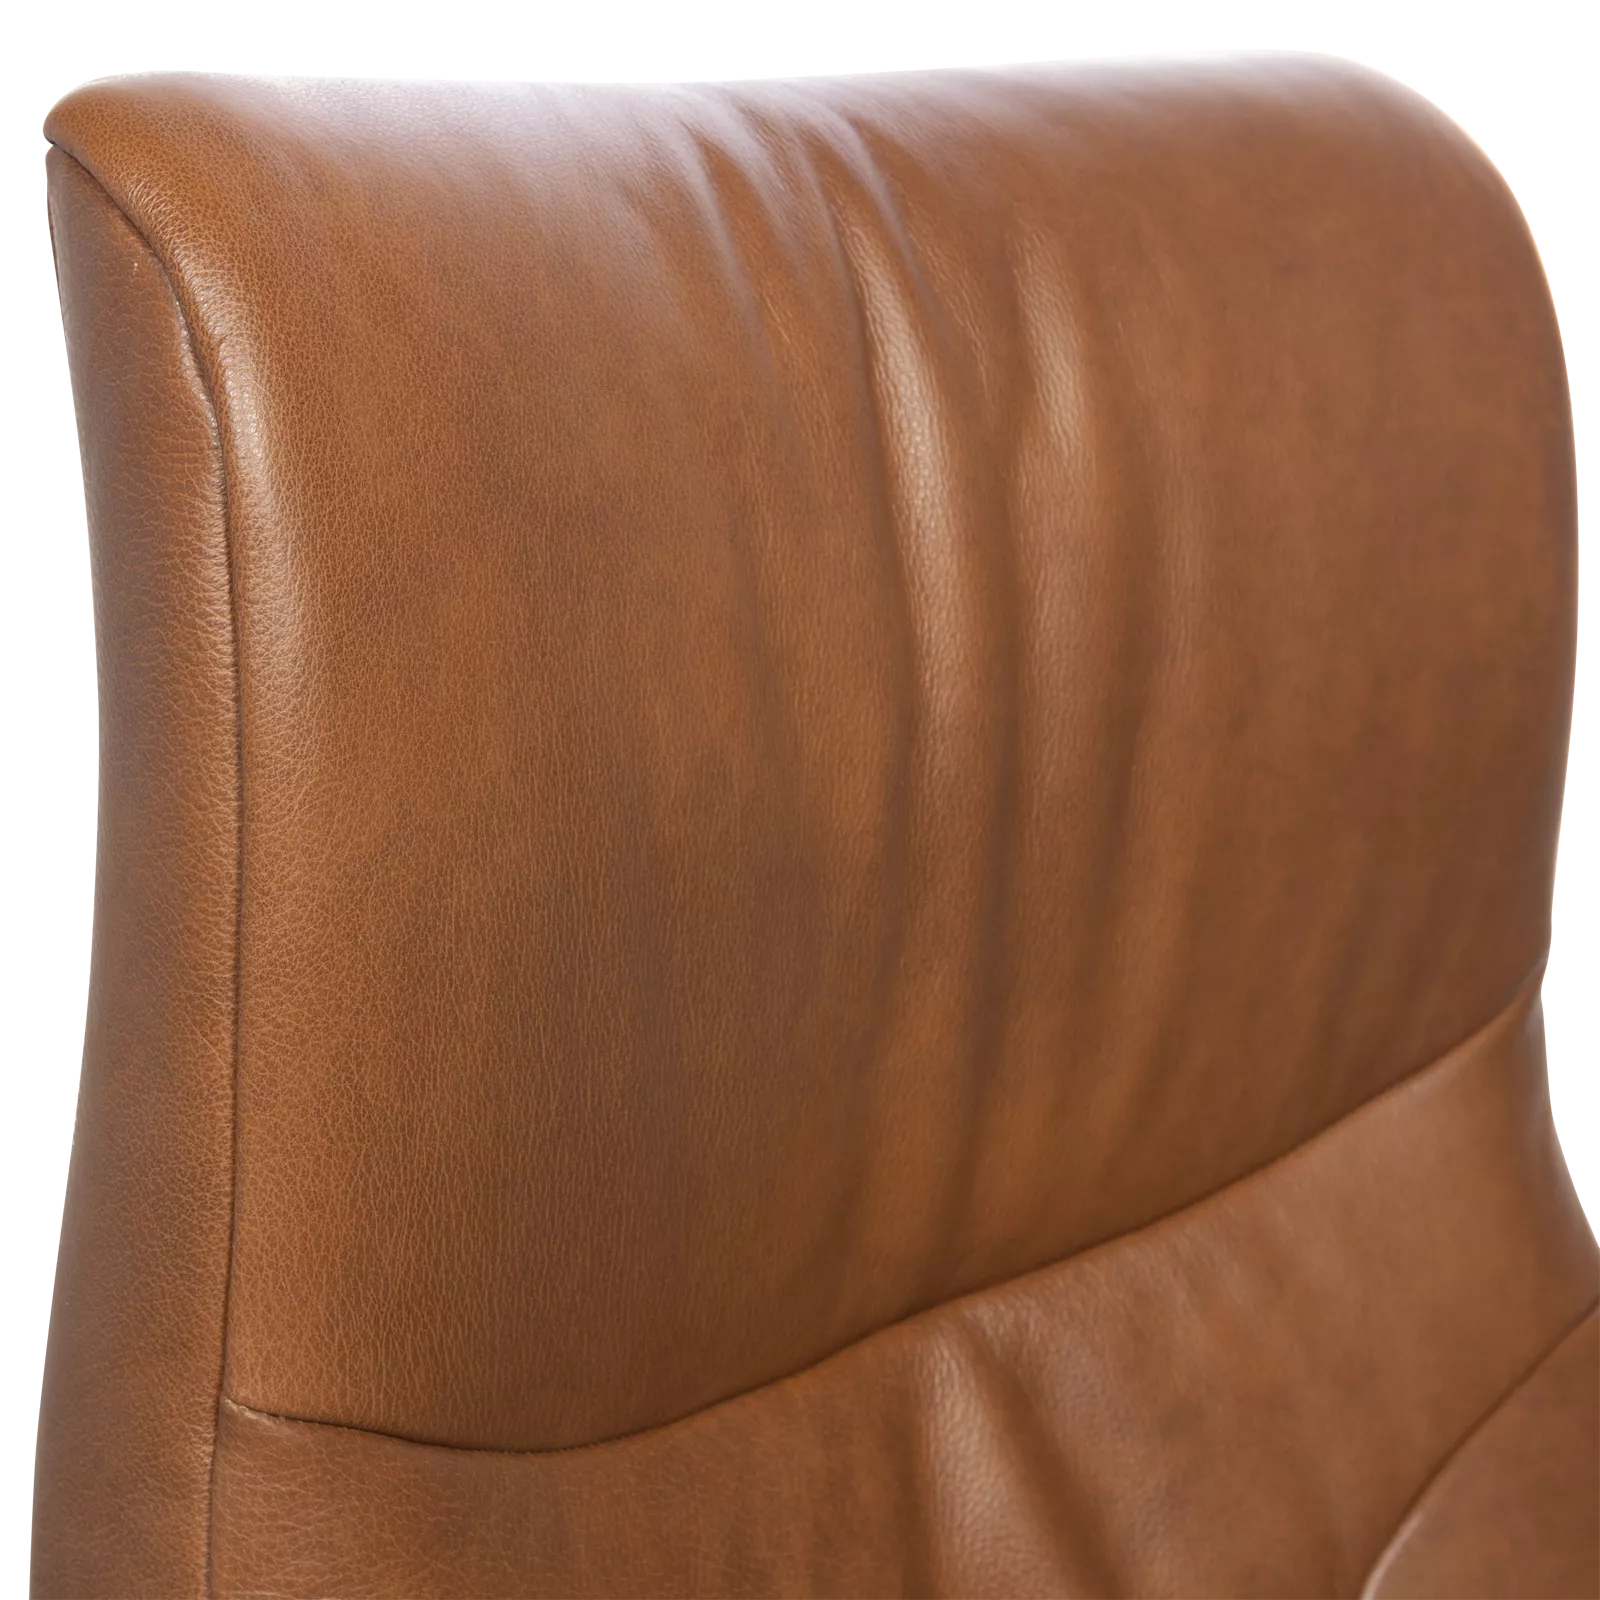 Relaxfauteuil (extra large - voet 88) Profile - Moreno Savannah